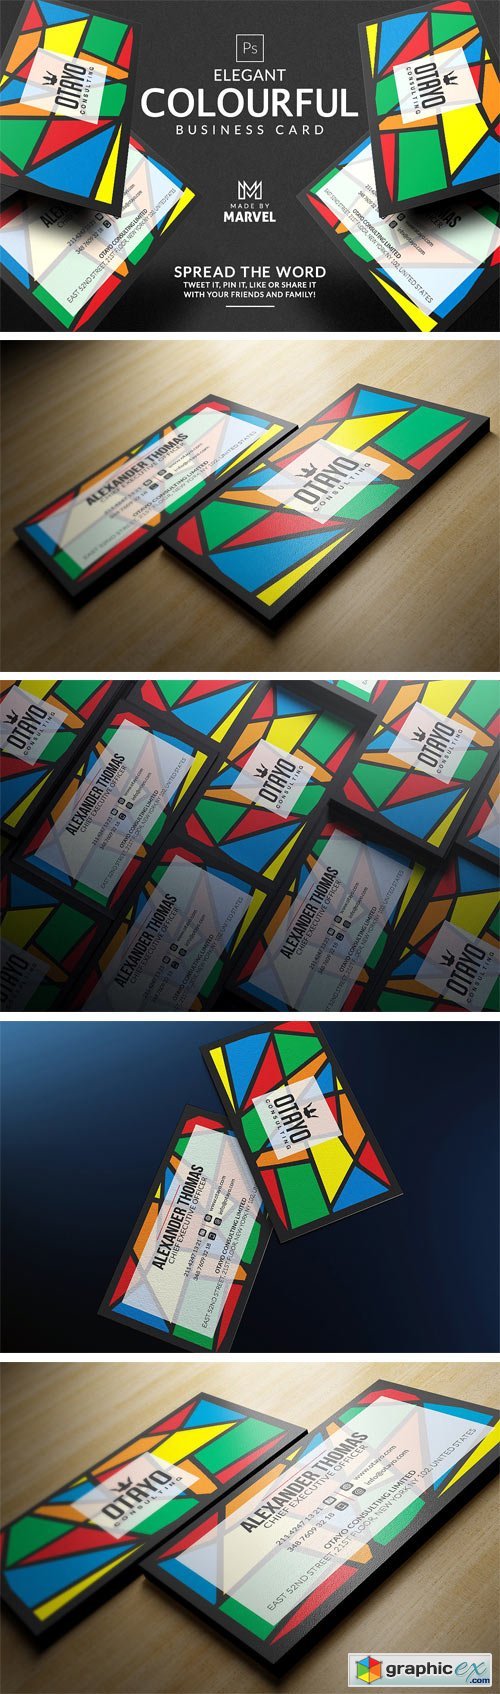 Colourful Business Card Template 1435190